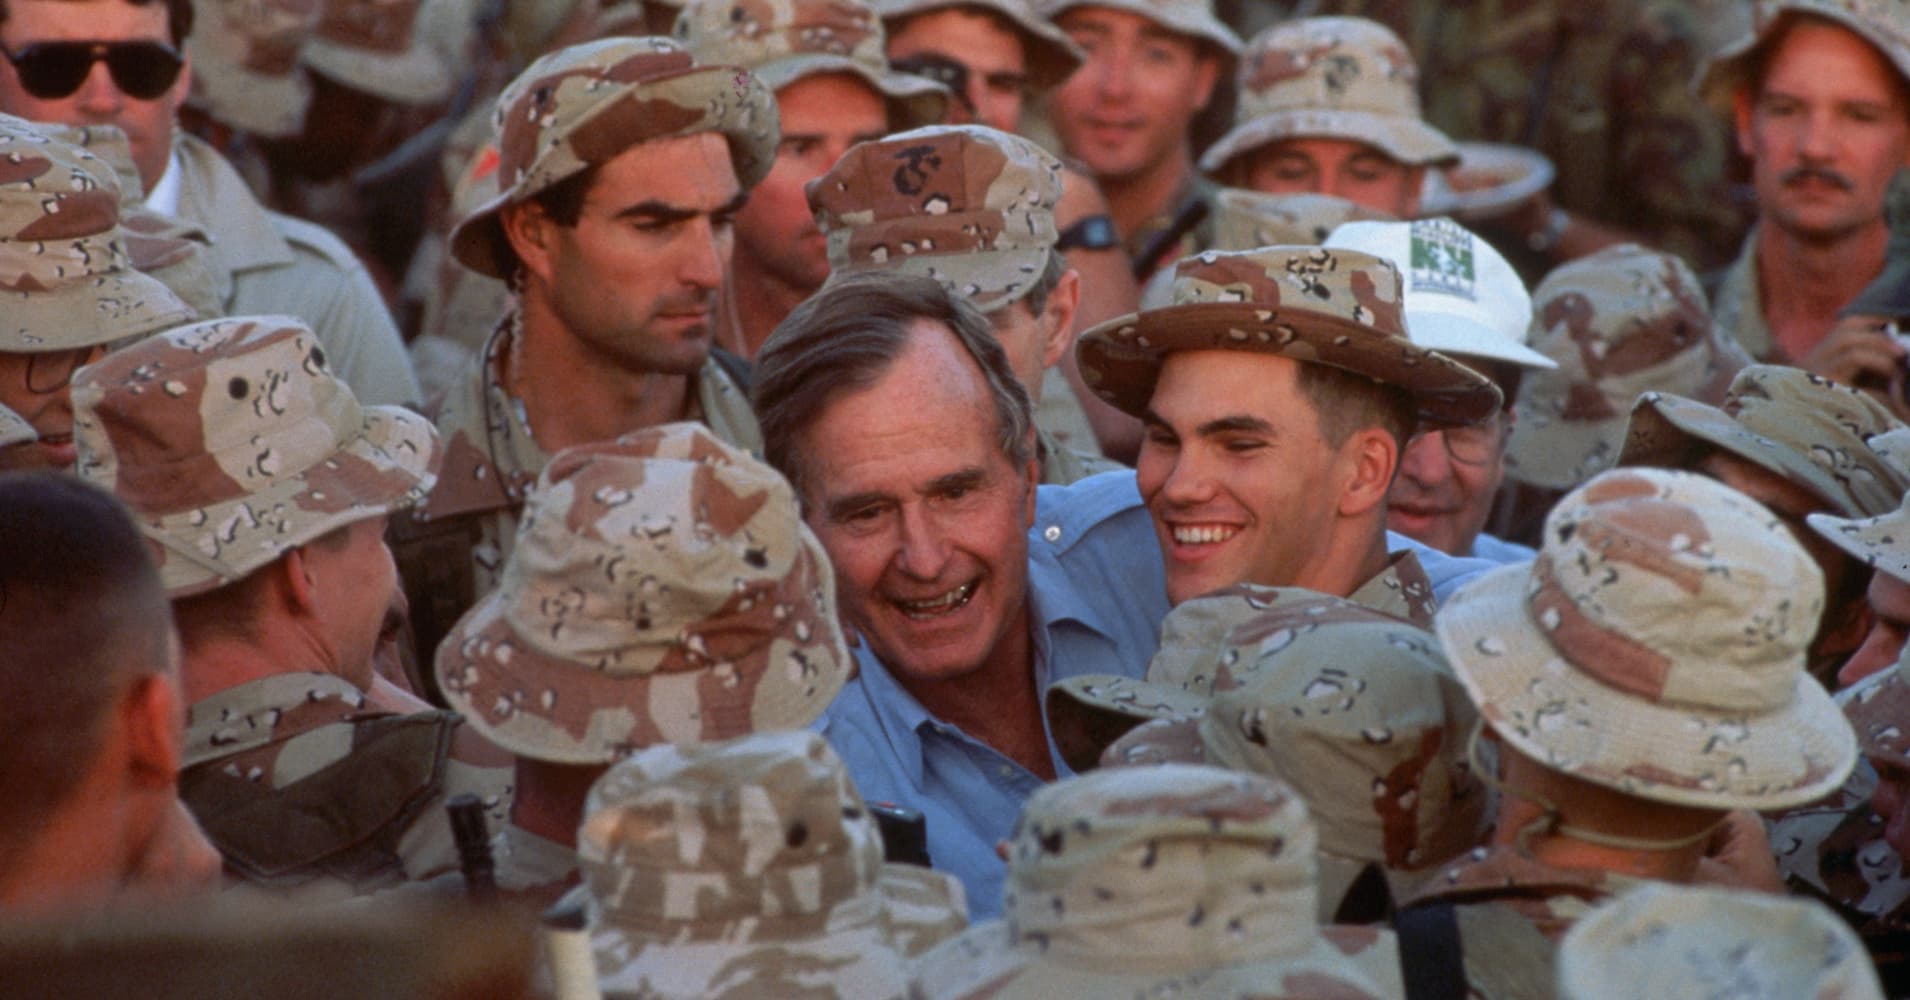 President George Bush shakes hands with US Army troops in Saudi Arabia during the Gulf War on Thanksgiving Day, 1990. (